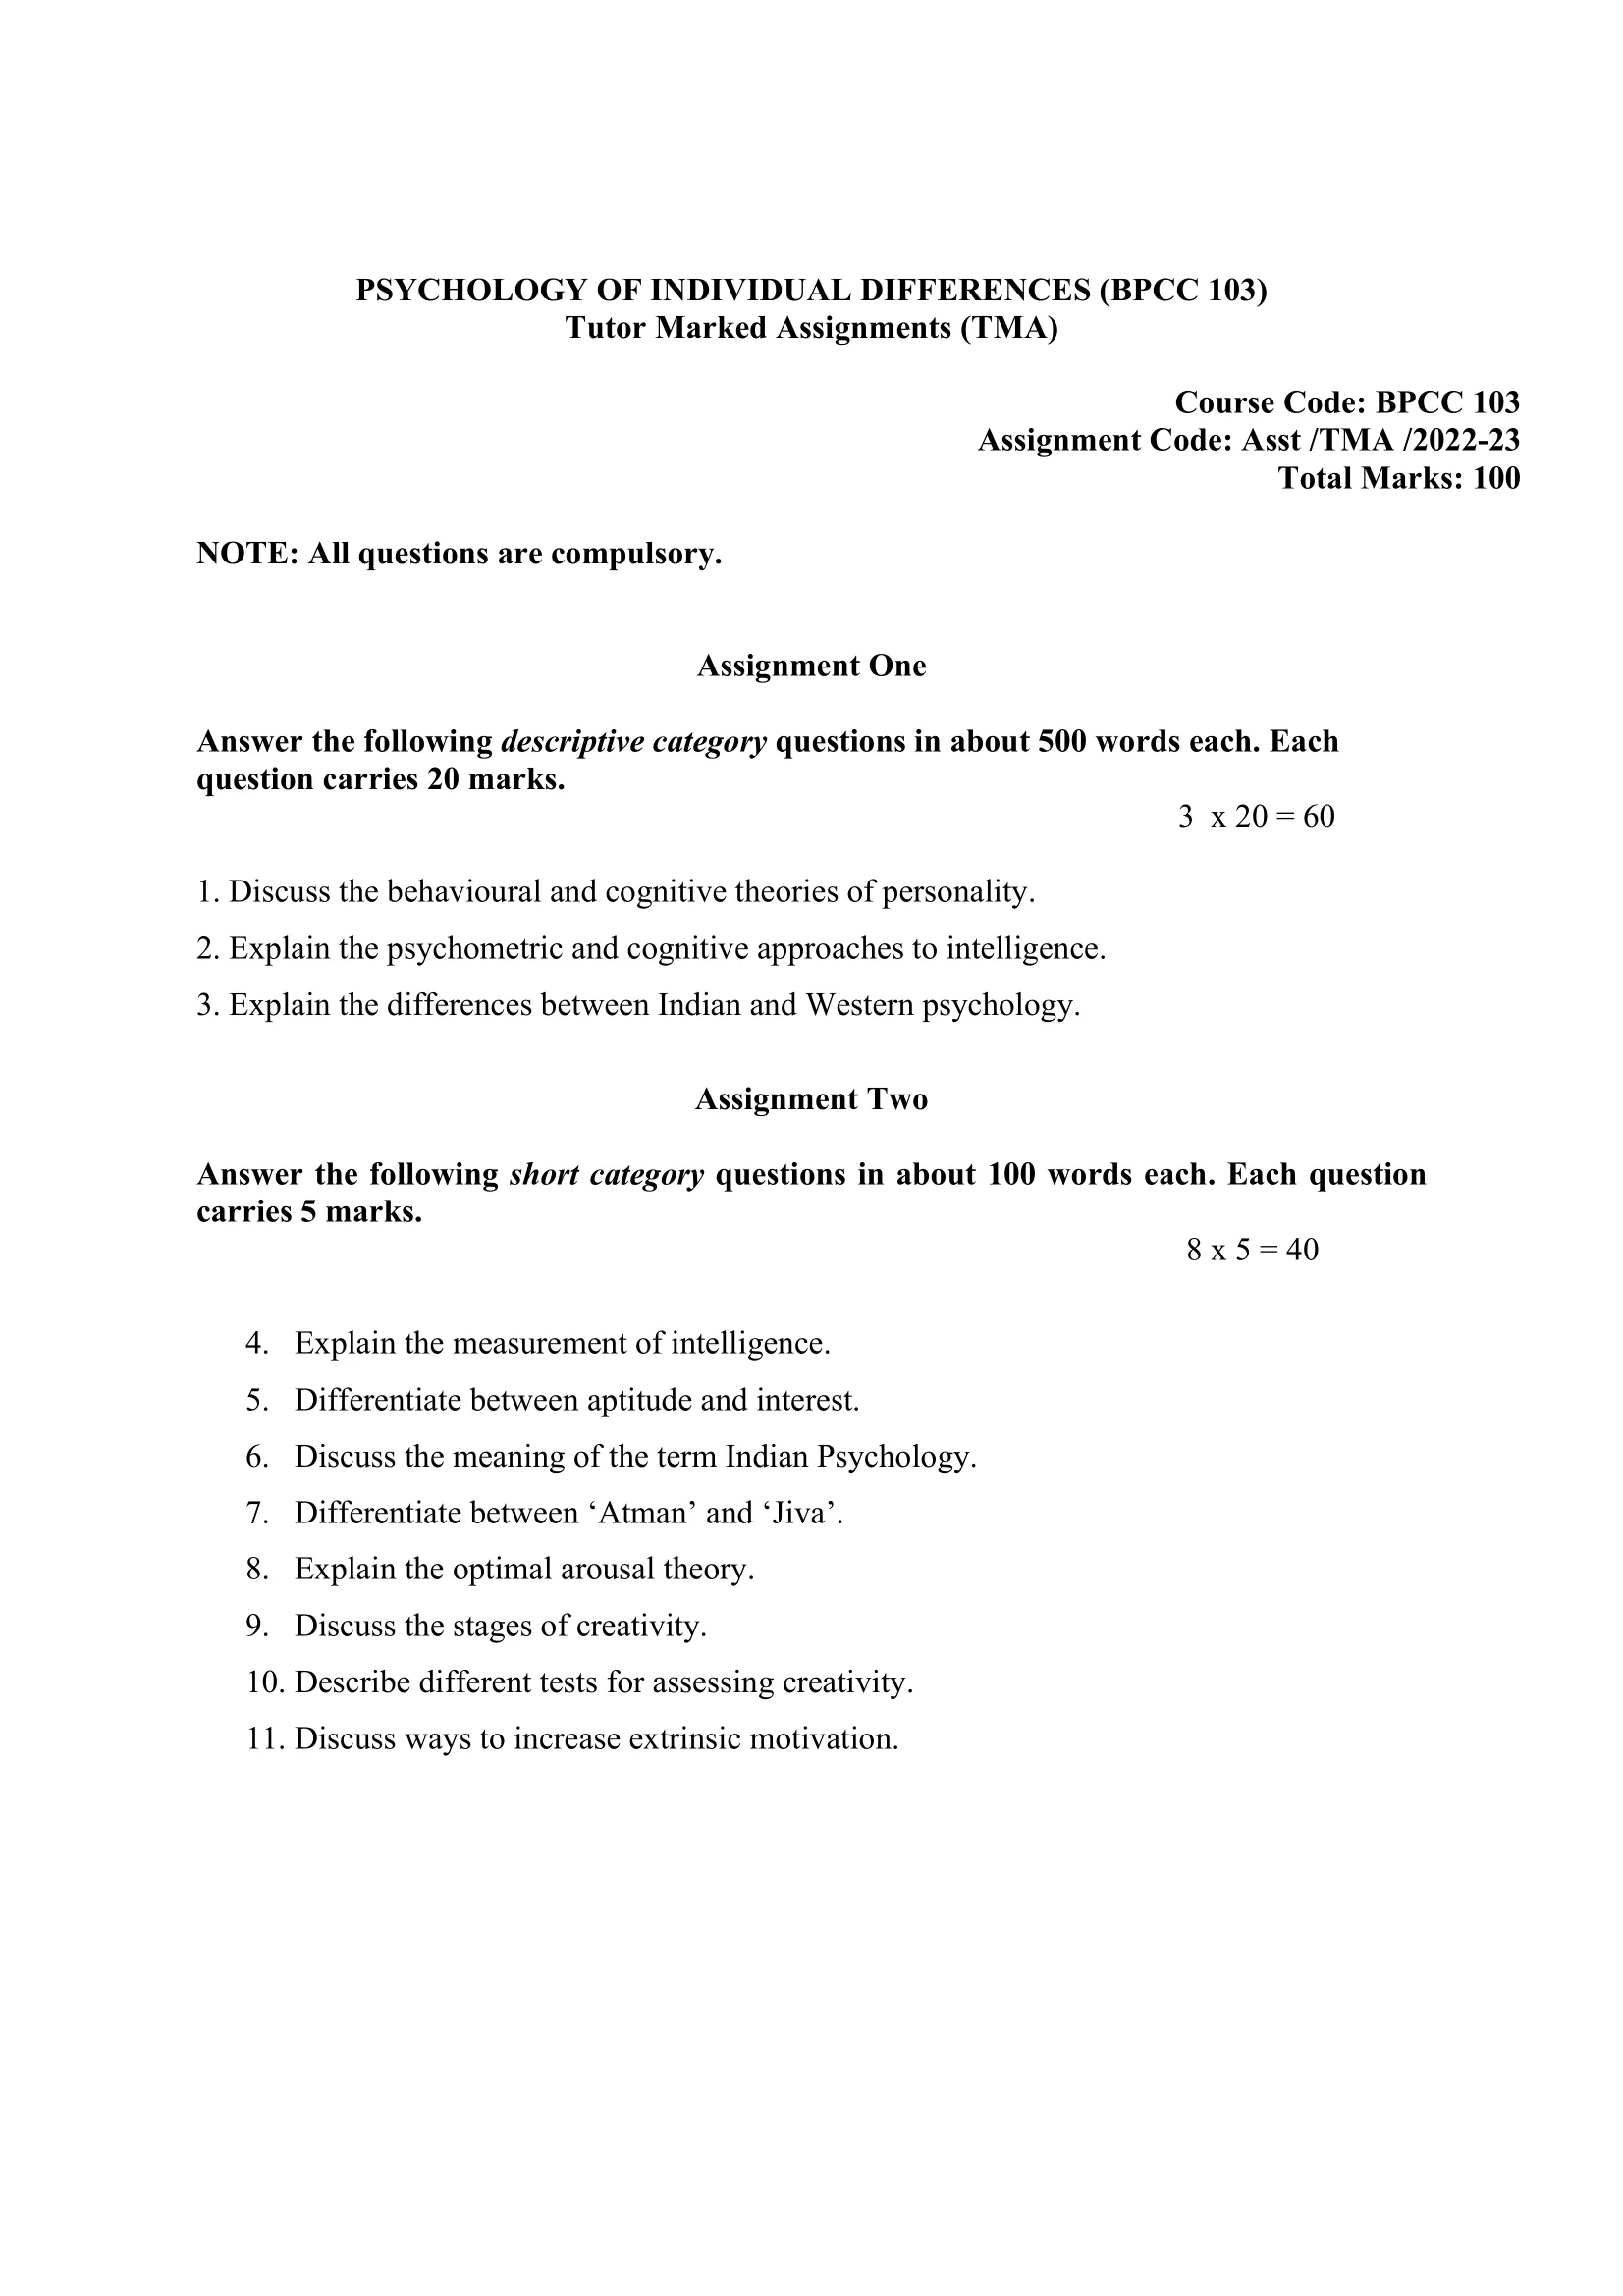 BPCC 103 IGNOU Solved Assignment 2022-2023 PSYCHOLOGY OF INDIVIDUAL DIFFERENCES